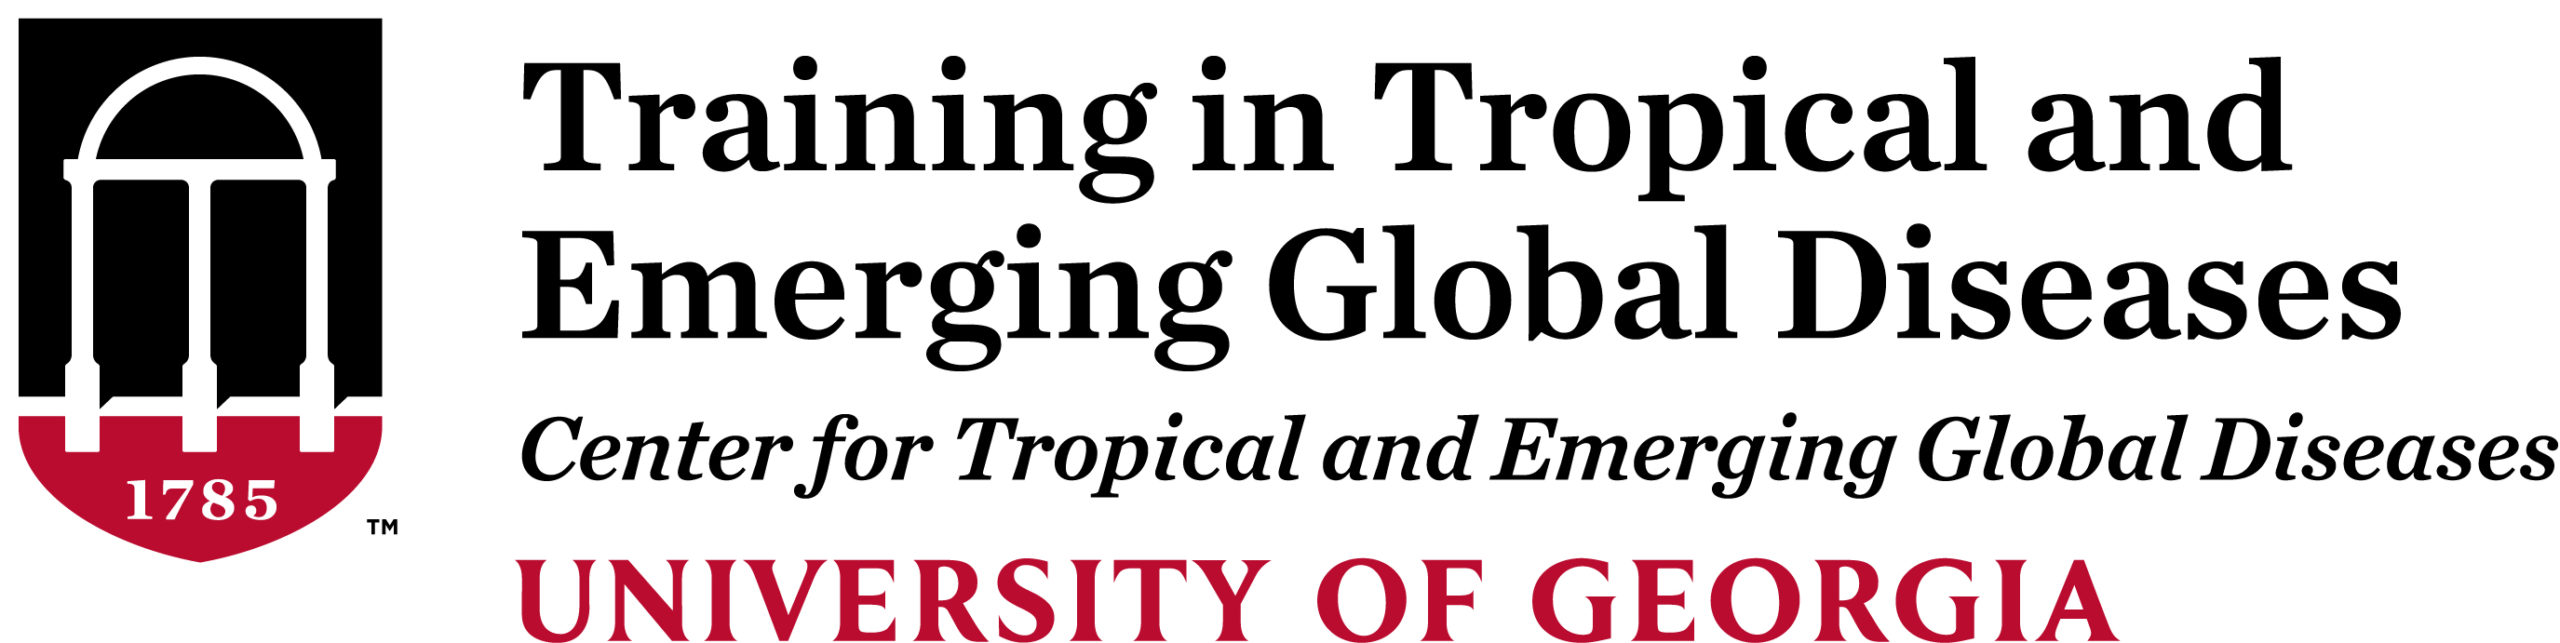 Training in Tropical and Emerging Global Diseases